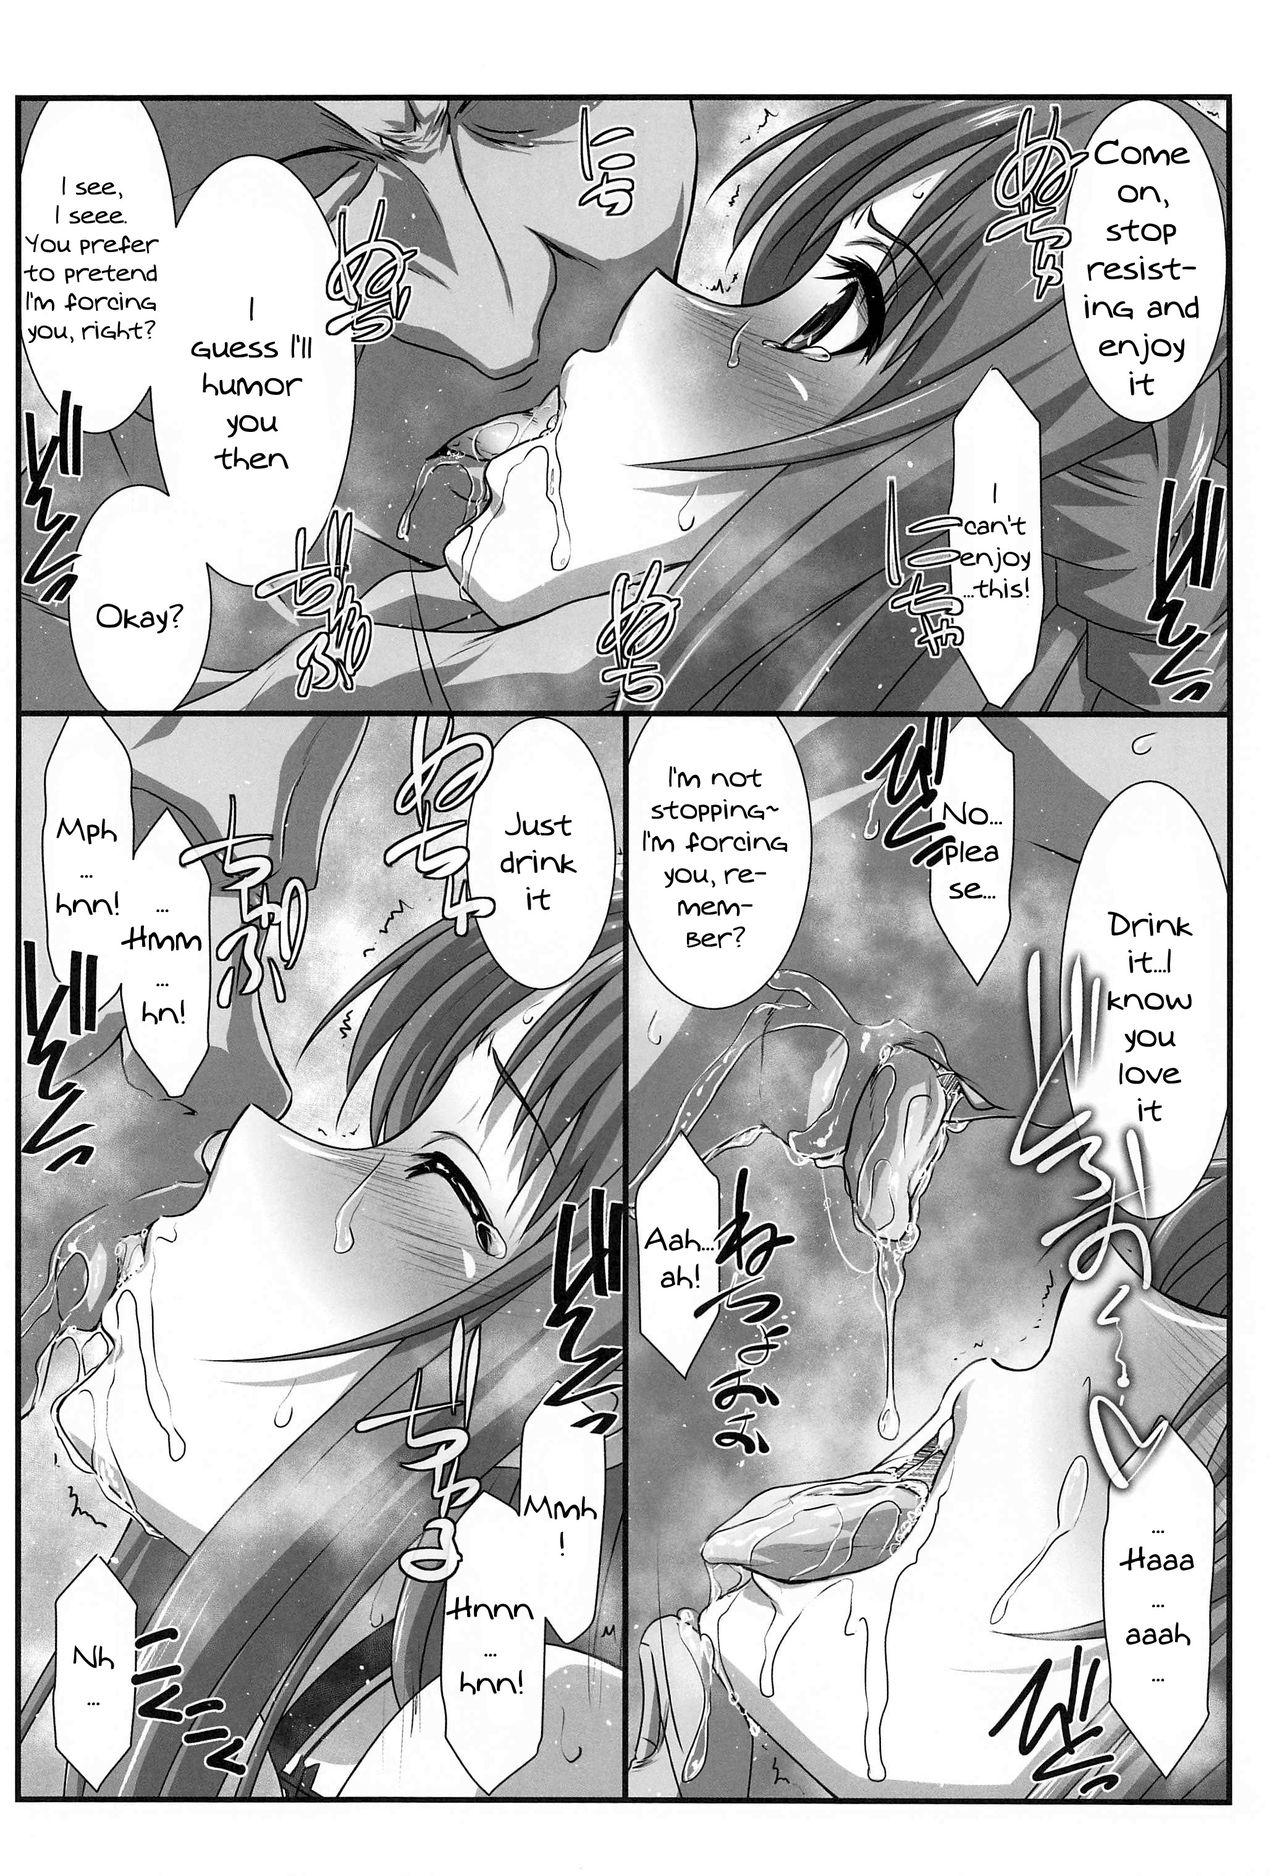 Sexy Girl Astral Bout Ver. 43 - Sword art online Pornstar - Page 7